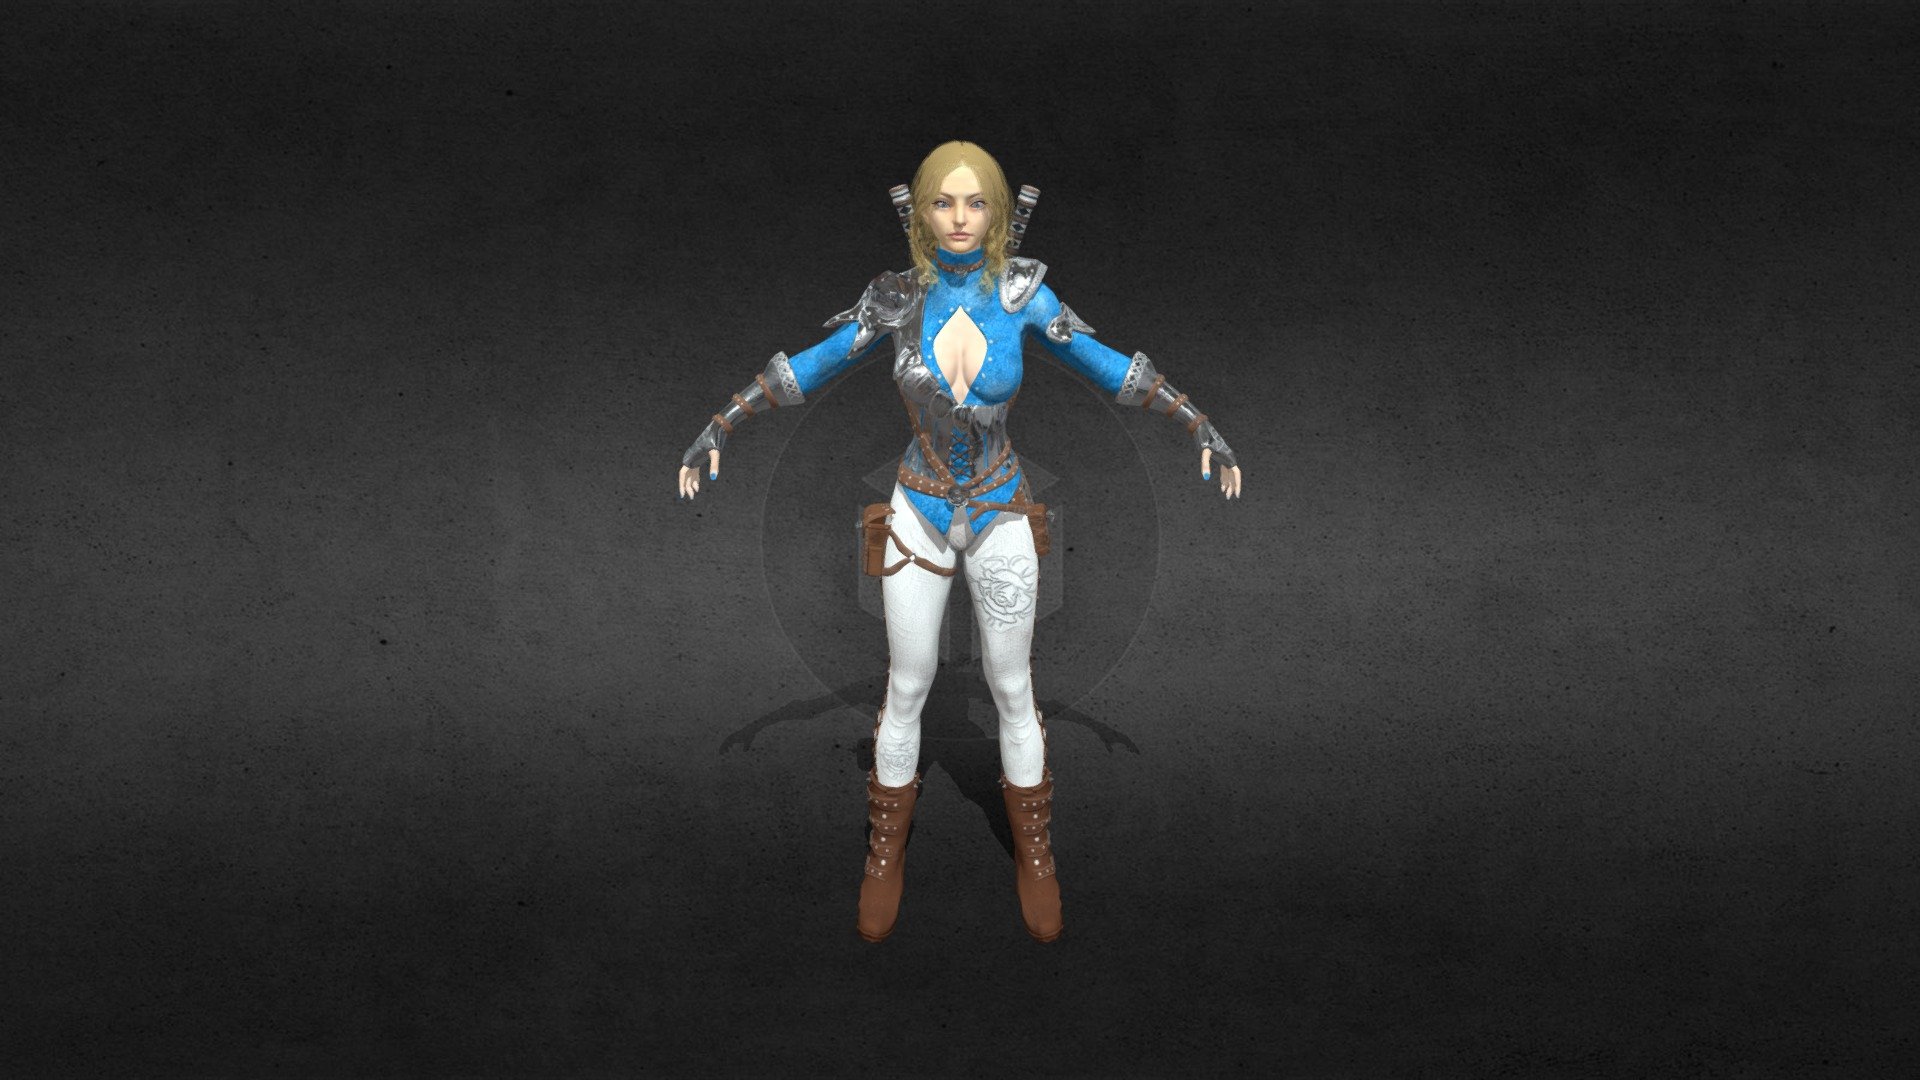 Warrior Rose low-poly 3d model ready for Virtual Reality (VR), Augmented Reality (AR), games and other real-time apps.

Beautiful low-poly Warrior Rose 
Actual size of the low poly 3d model animated rigged ready for games and other applications in real-time.

Sculpting models zbrush 
Animation and rigging in maya. 
Textures 3d coat

PBR textures(Metallic and other texture) 
the character consists of prefabricated parts, with 4k textures

model has 3 texture options
And a few basic meshes.

In some places on the body, a two-sided shader is used
For a unity, it is enclosed in a texture package

Rigging -Controllers from Maya 2019 Built-in controller
skinning all the bones

Contains 52 animation

idle(х6) 
walk(х8) 
run(х8) 
attack(х7) 
death(х4) 
strafe(x9)
block(х3) 
jump(х2) 
get hit(x4) 
power up (x2)

faces 22969 
verts 29866 
tris 45487 - Base Mesh - 3D model by nirvanochka 3d model